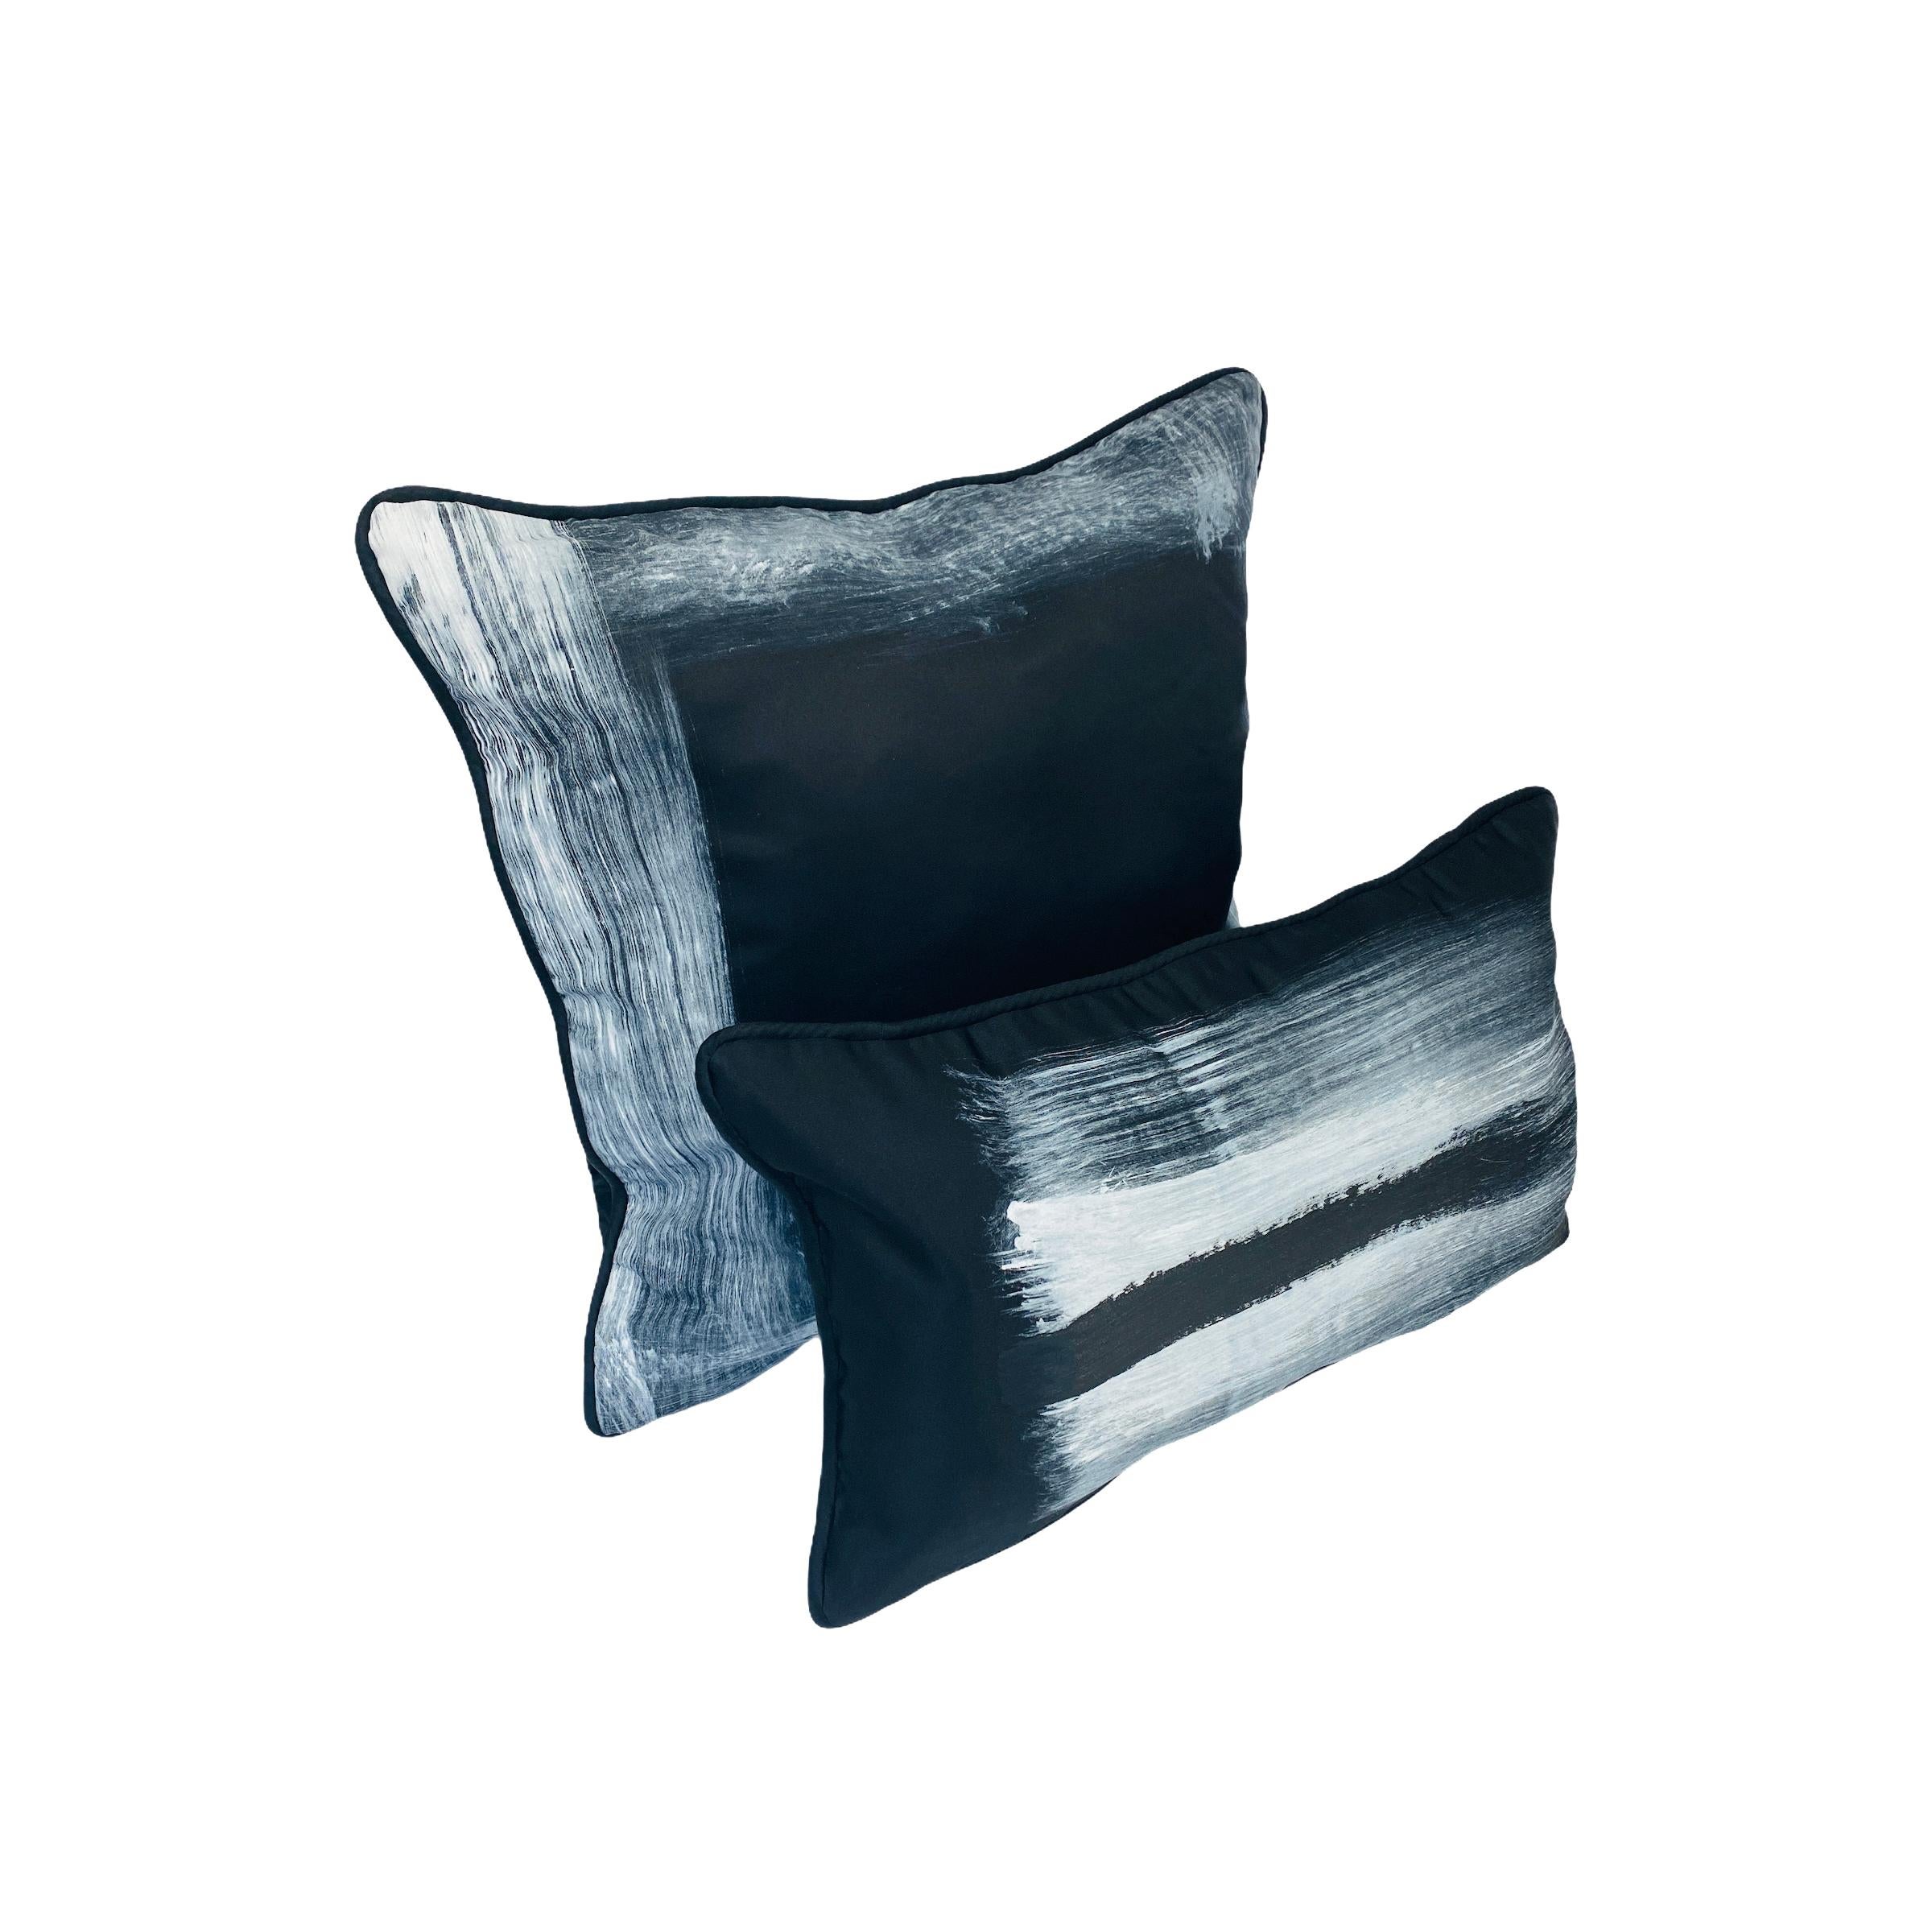 Authentic Italian silk duchesse satin pillows in midnight black. Hand-painted white artwork inspired by the minimalist art movement of the 1960s and 1970s. These pillows were dreamt up by our in-house design studio in Manhattan. Large pillow: 20 x